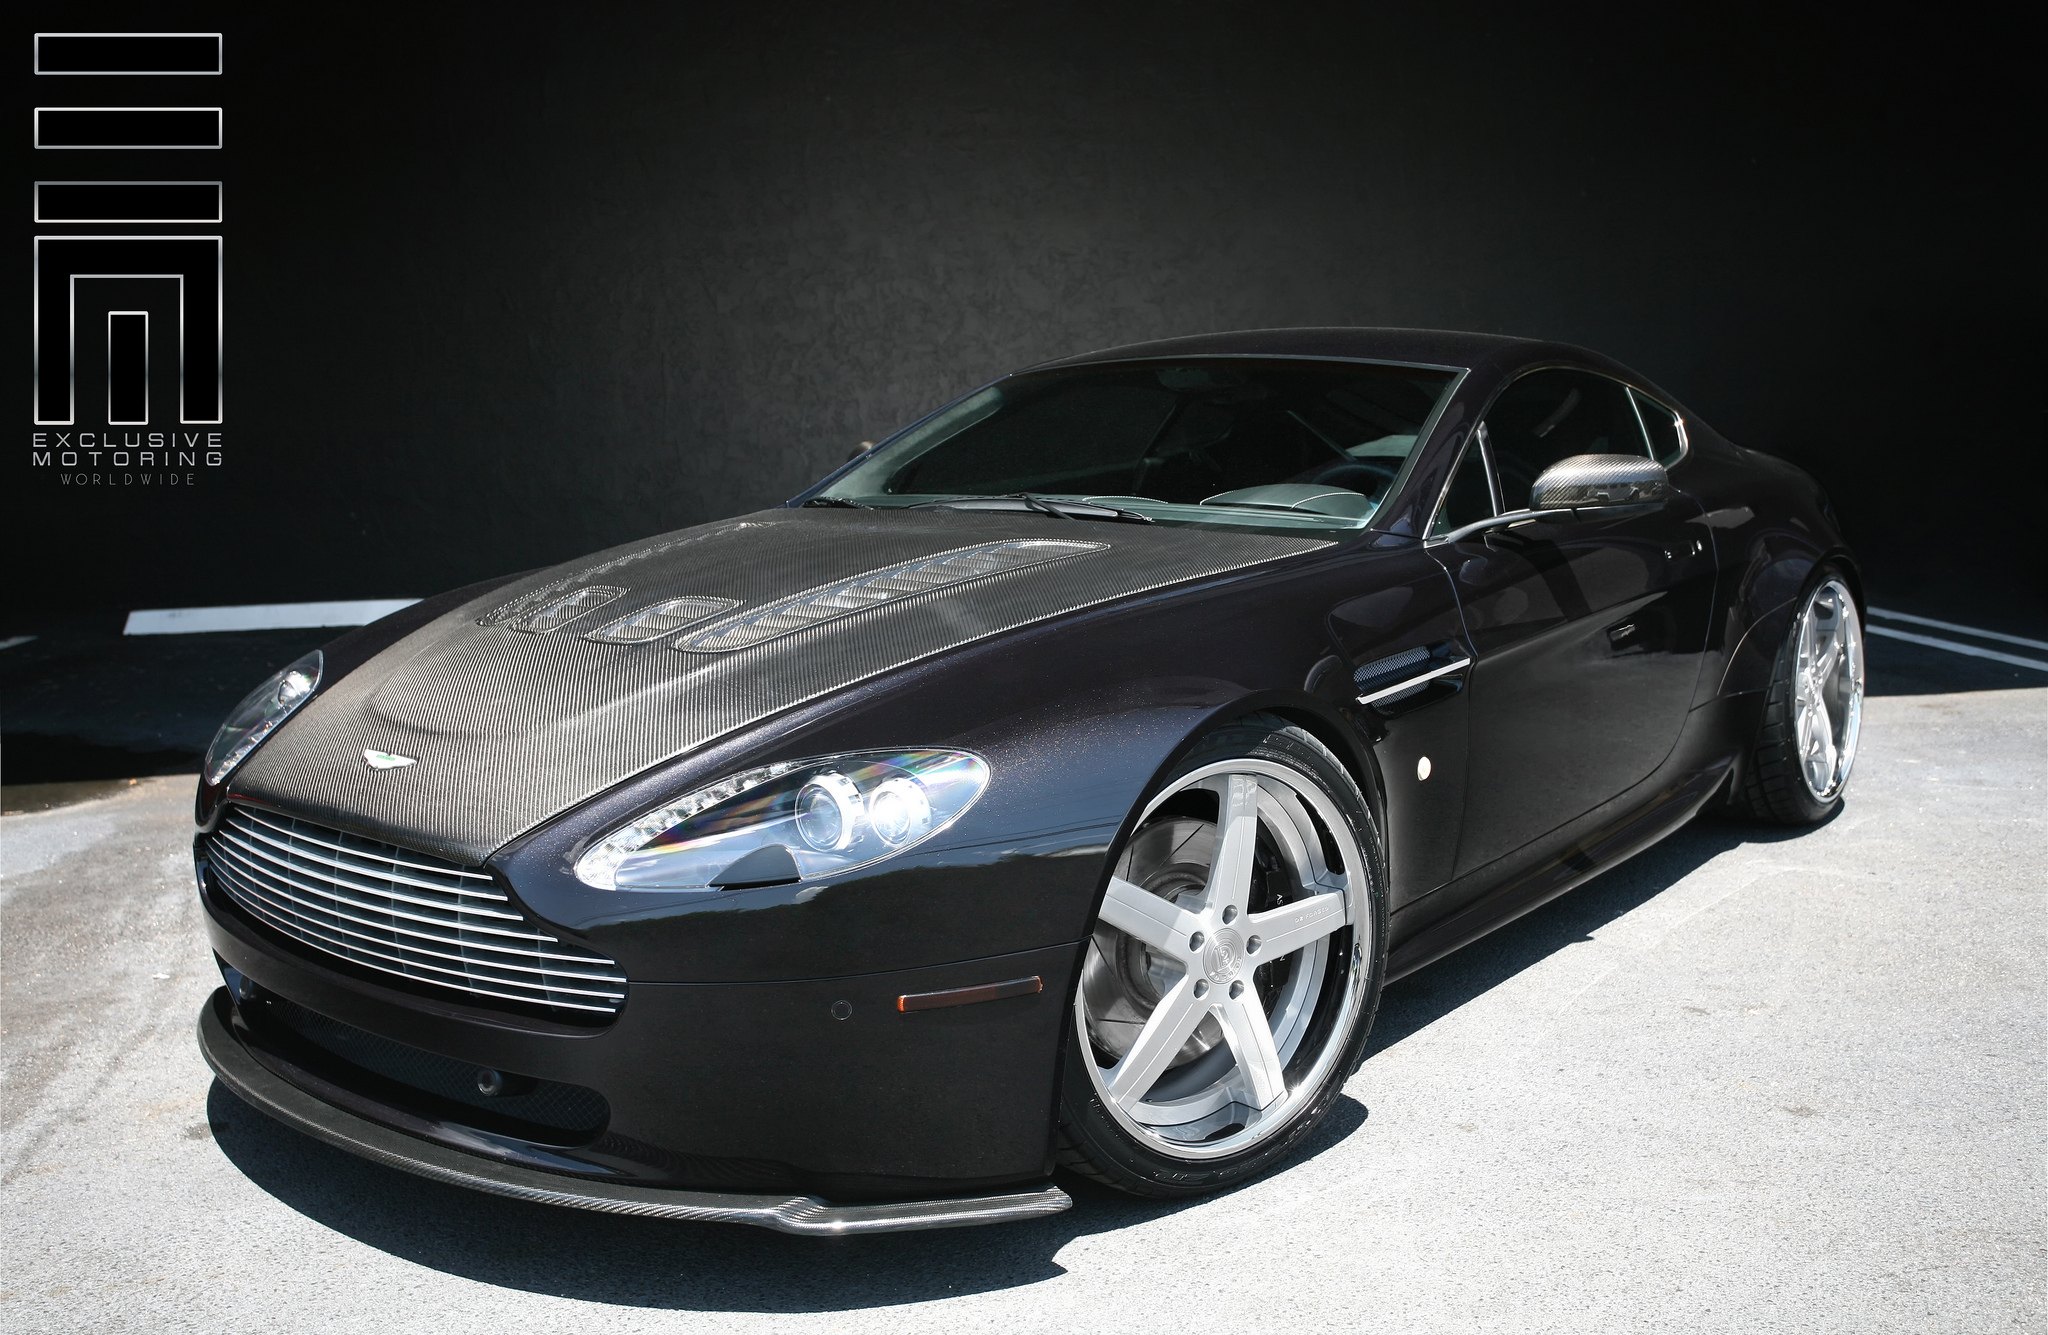 Aston Martin Vantage With Carbon Fiber Accents - Photo by Exclusive Motoring